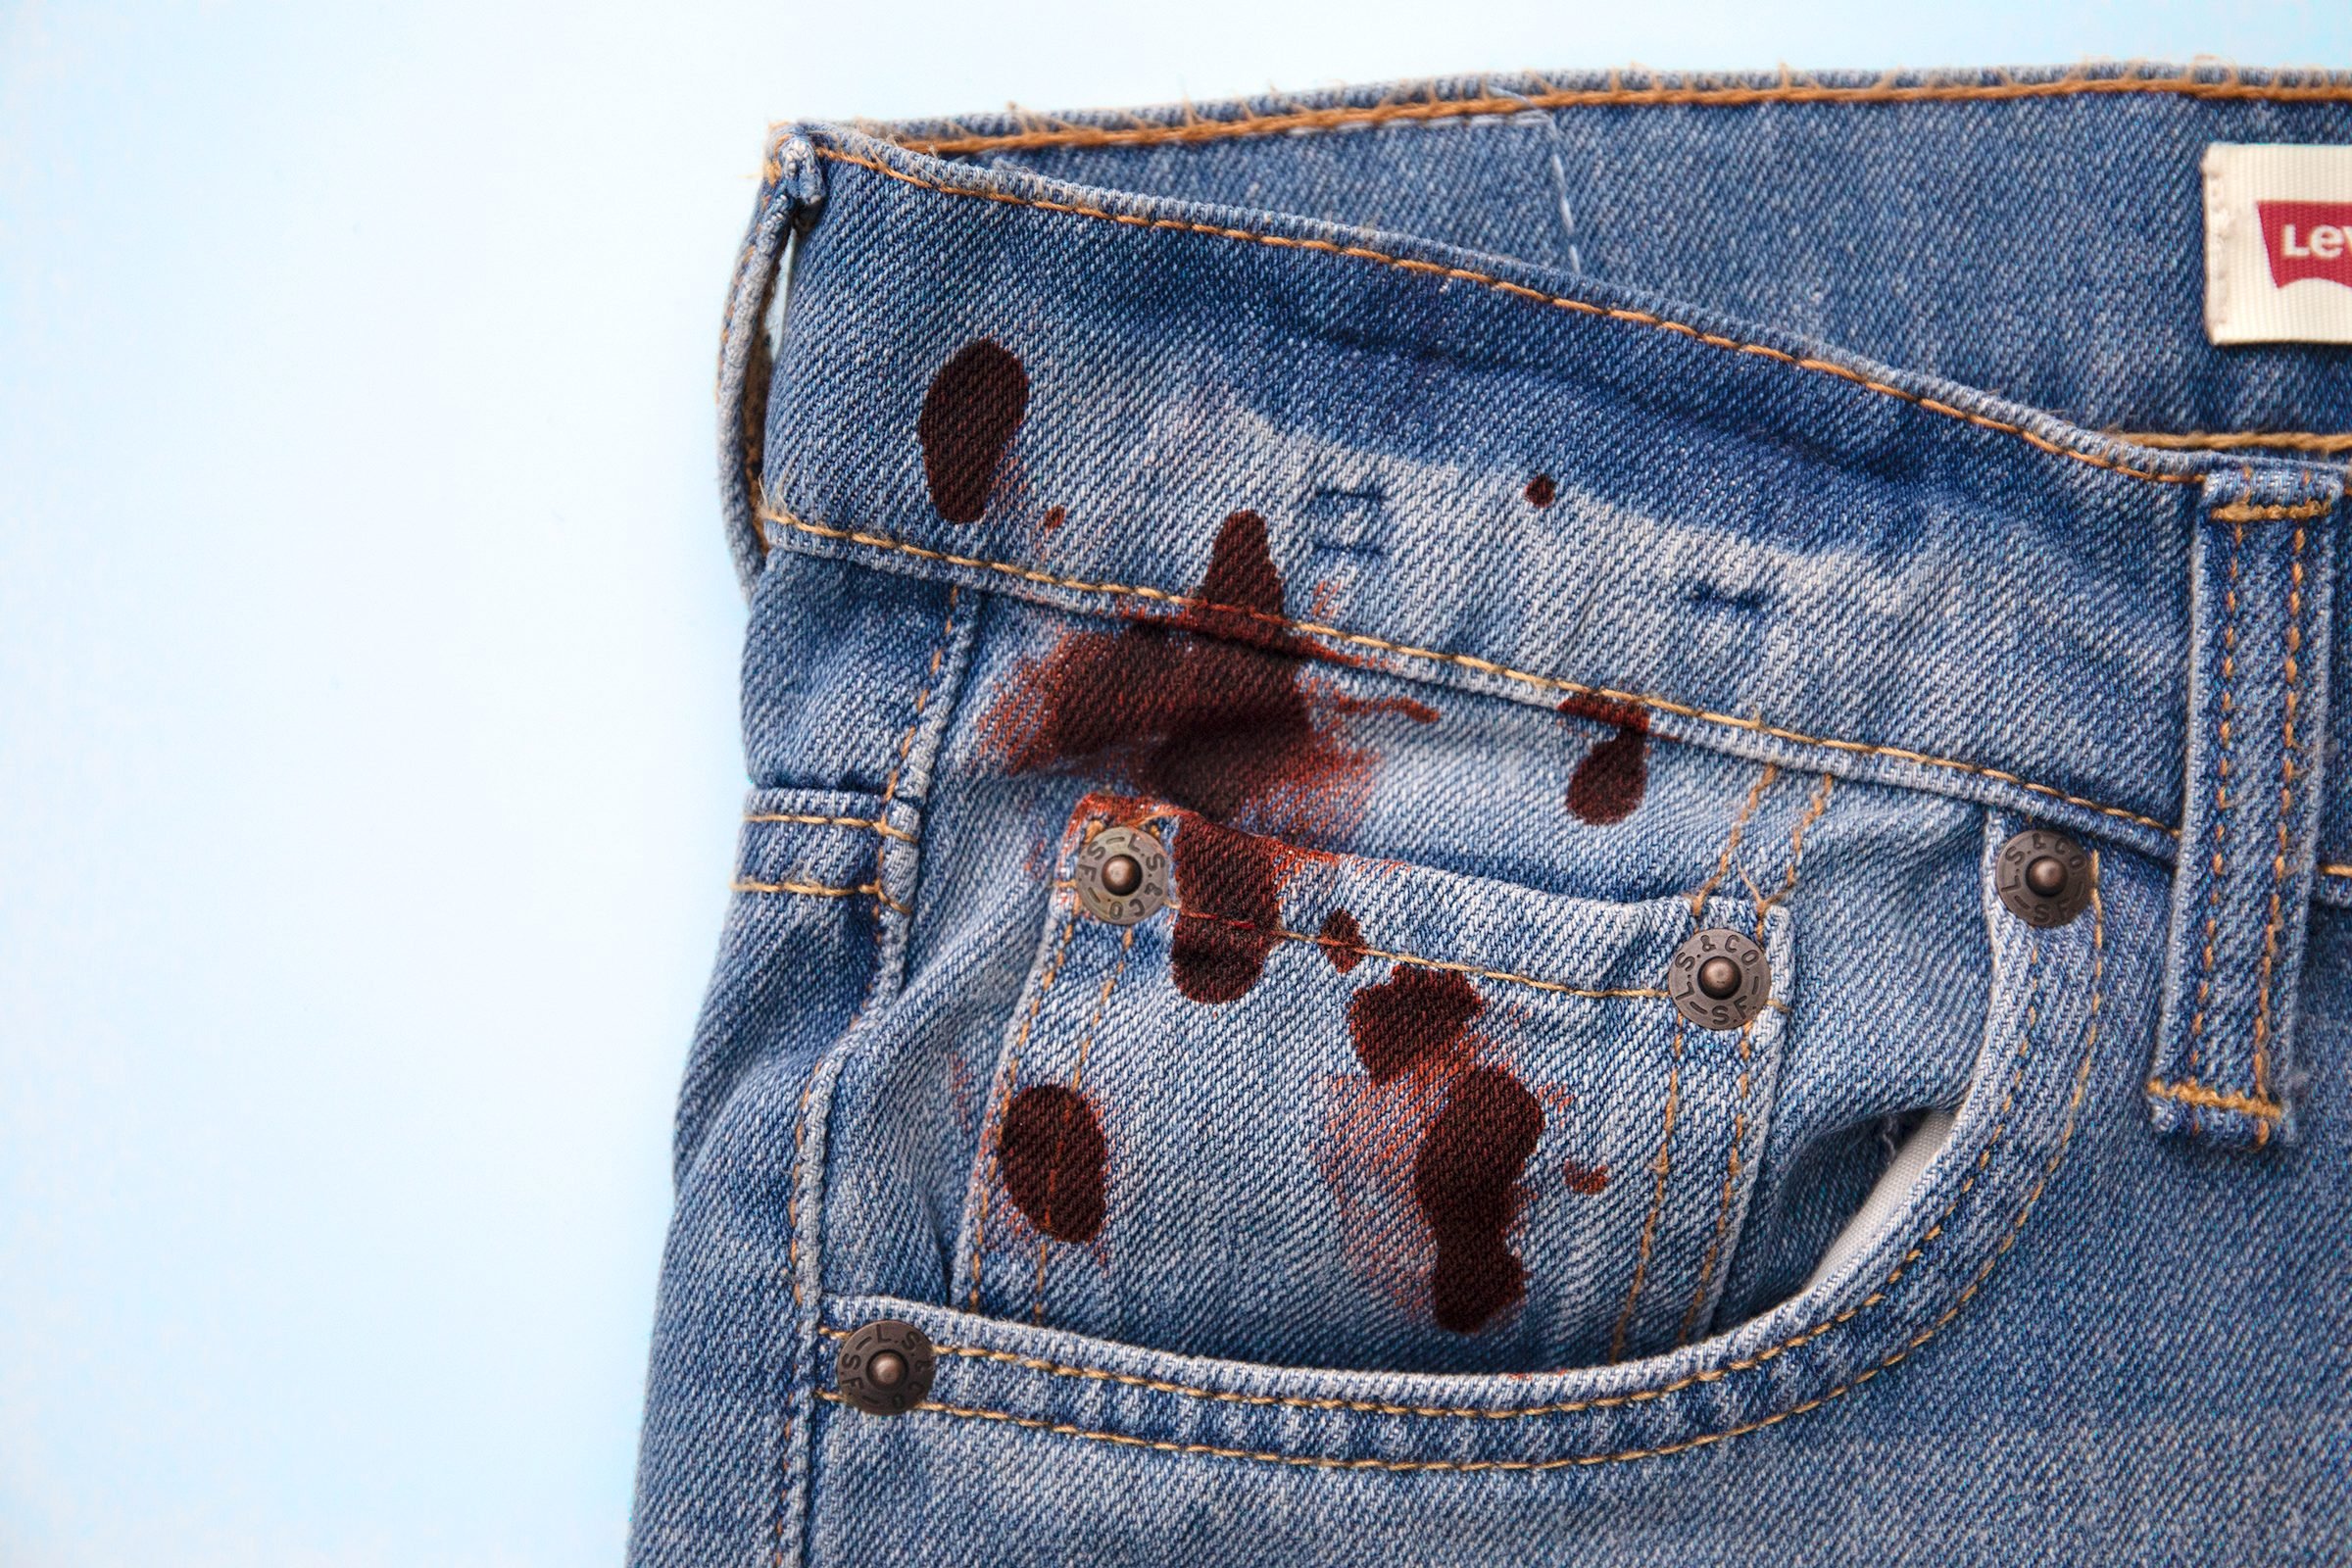 How to Get Blood Out of Jeans - Best Stain Removal Methods